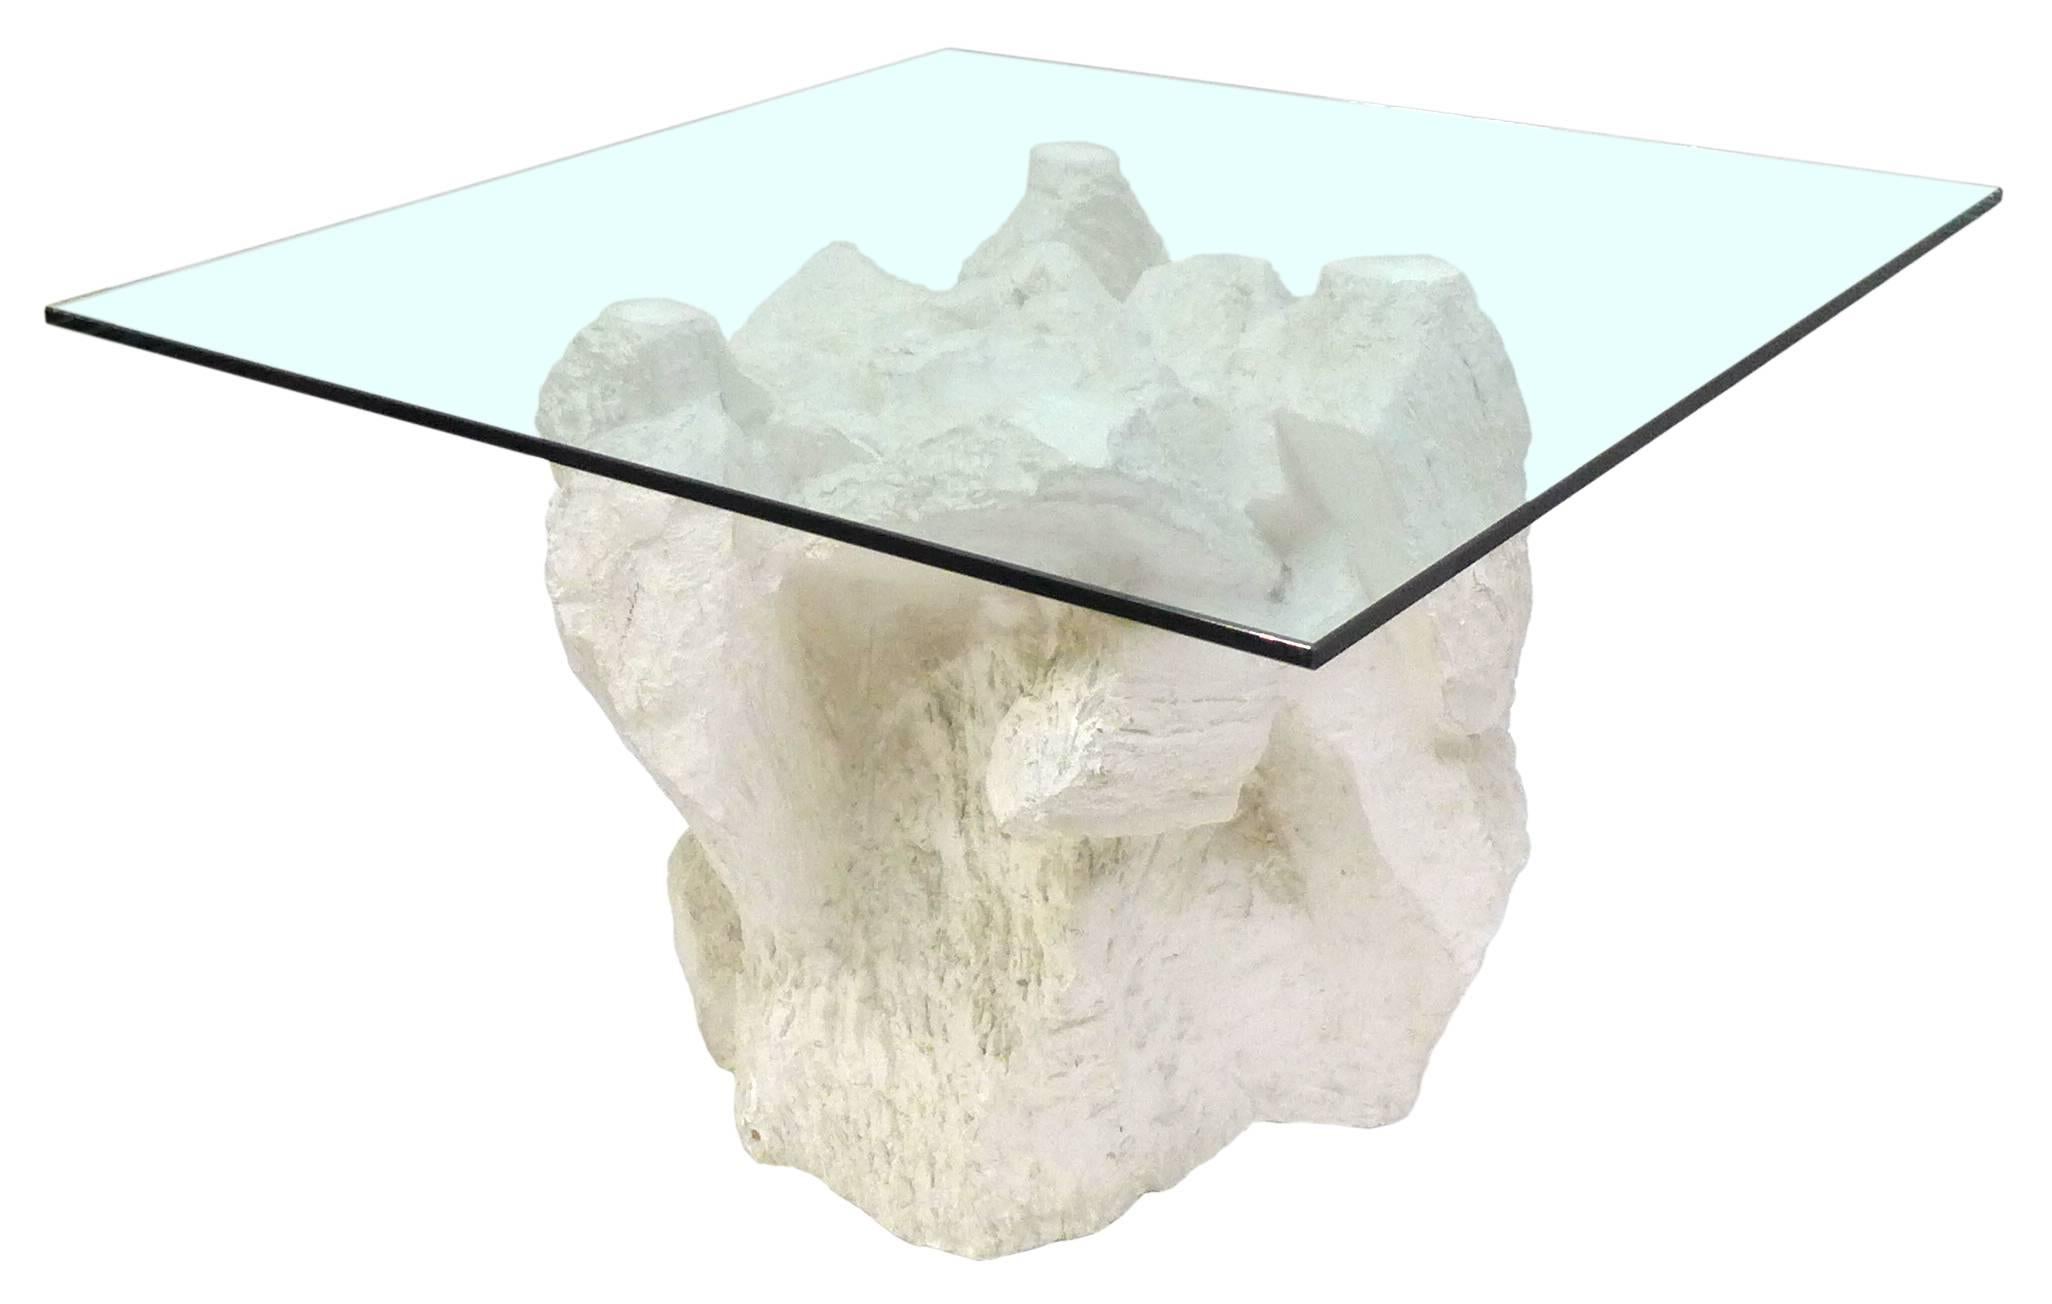 A wonderful and unusual hollow-cast plaster, glass-top side table by Sirmos. An extraordinary and eye-catching item, the base cast as a lifelike, natural rock formation in an out-of-context material taking an organic element to a more surreal place.